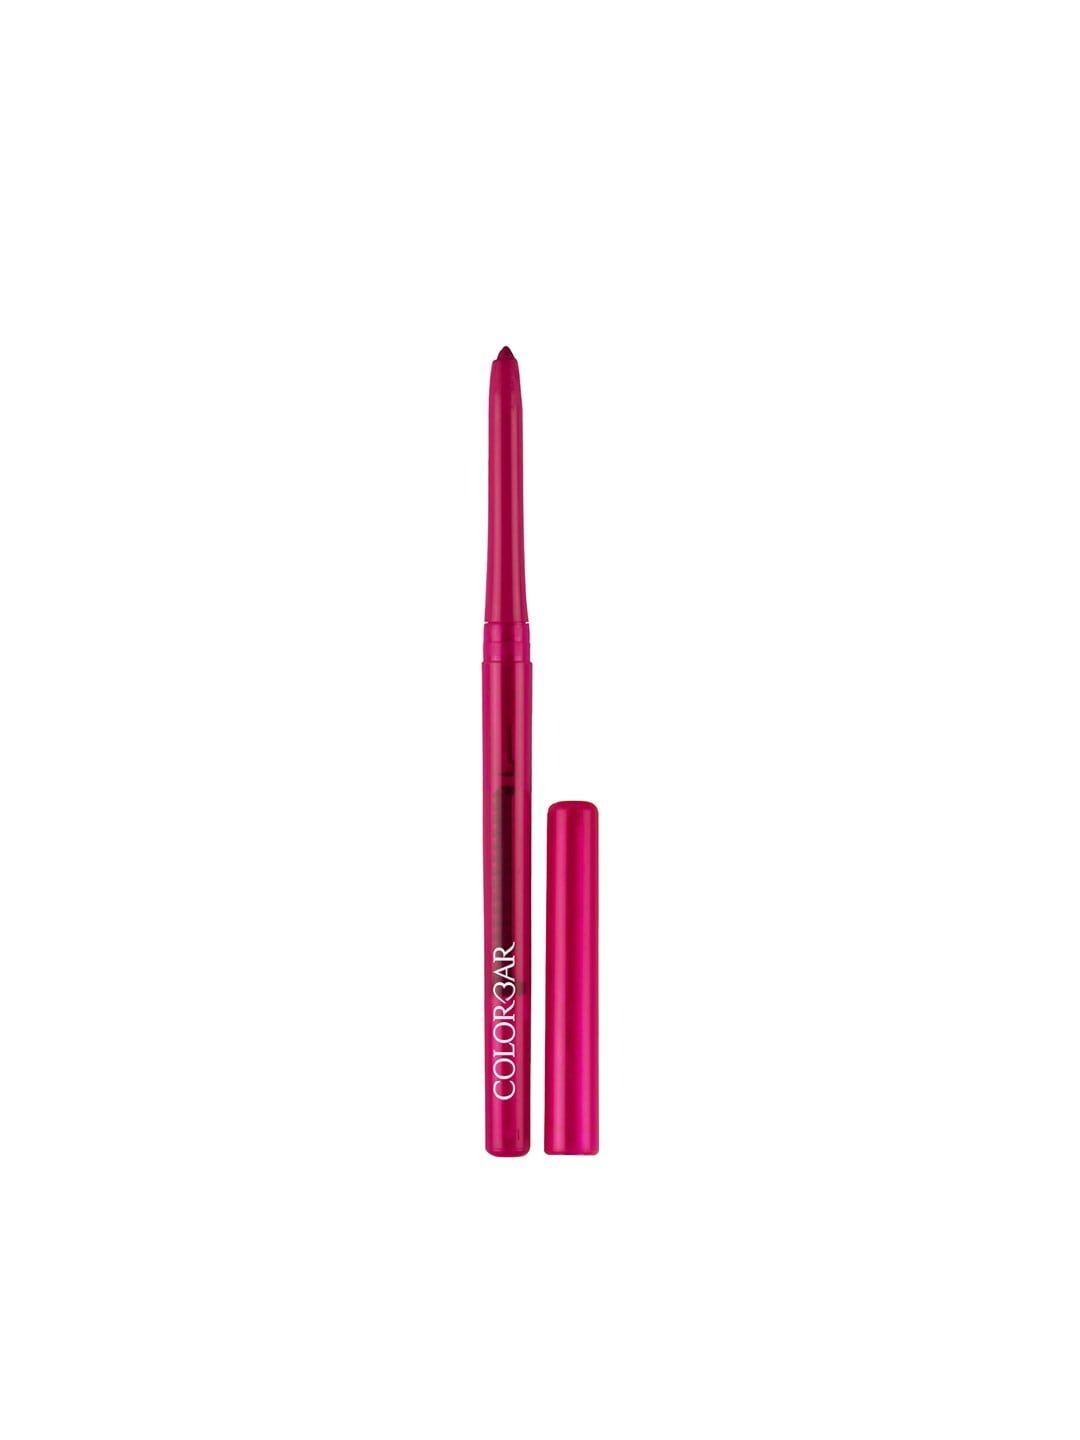 colorbar all-rounder pencil - sexy silhouette 009 0.29g